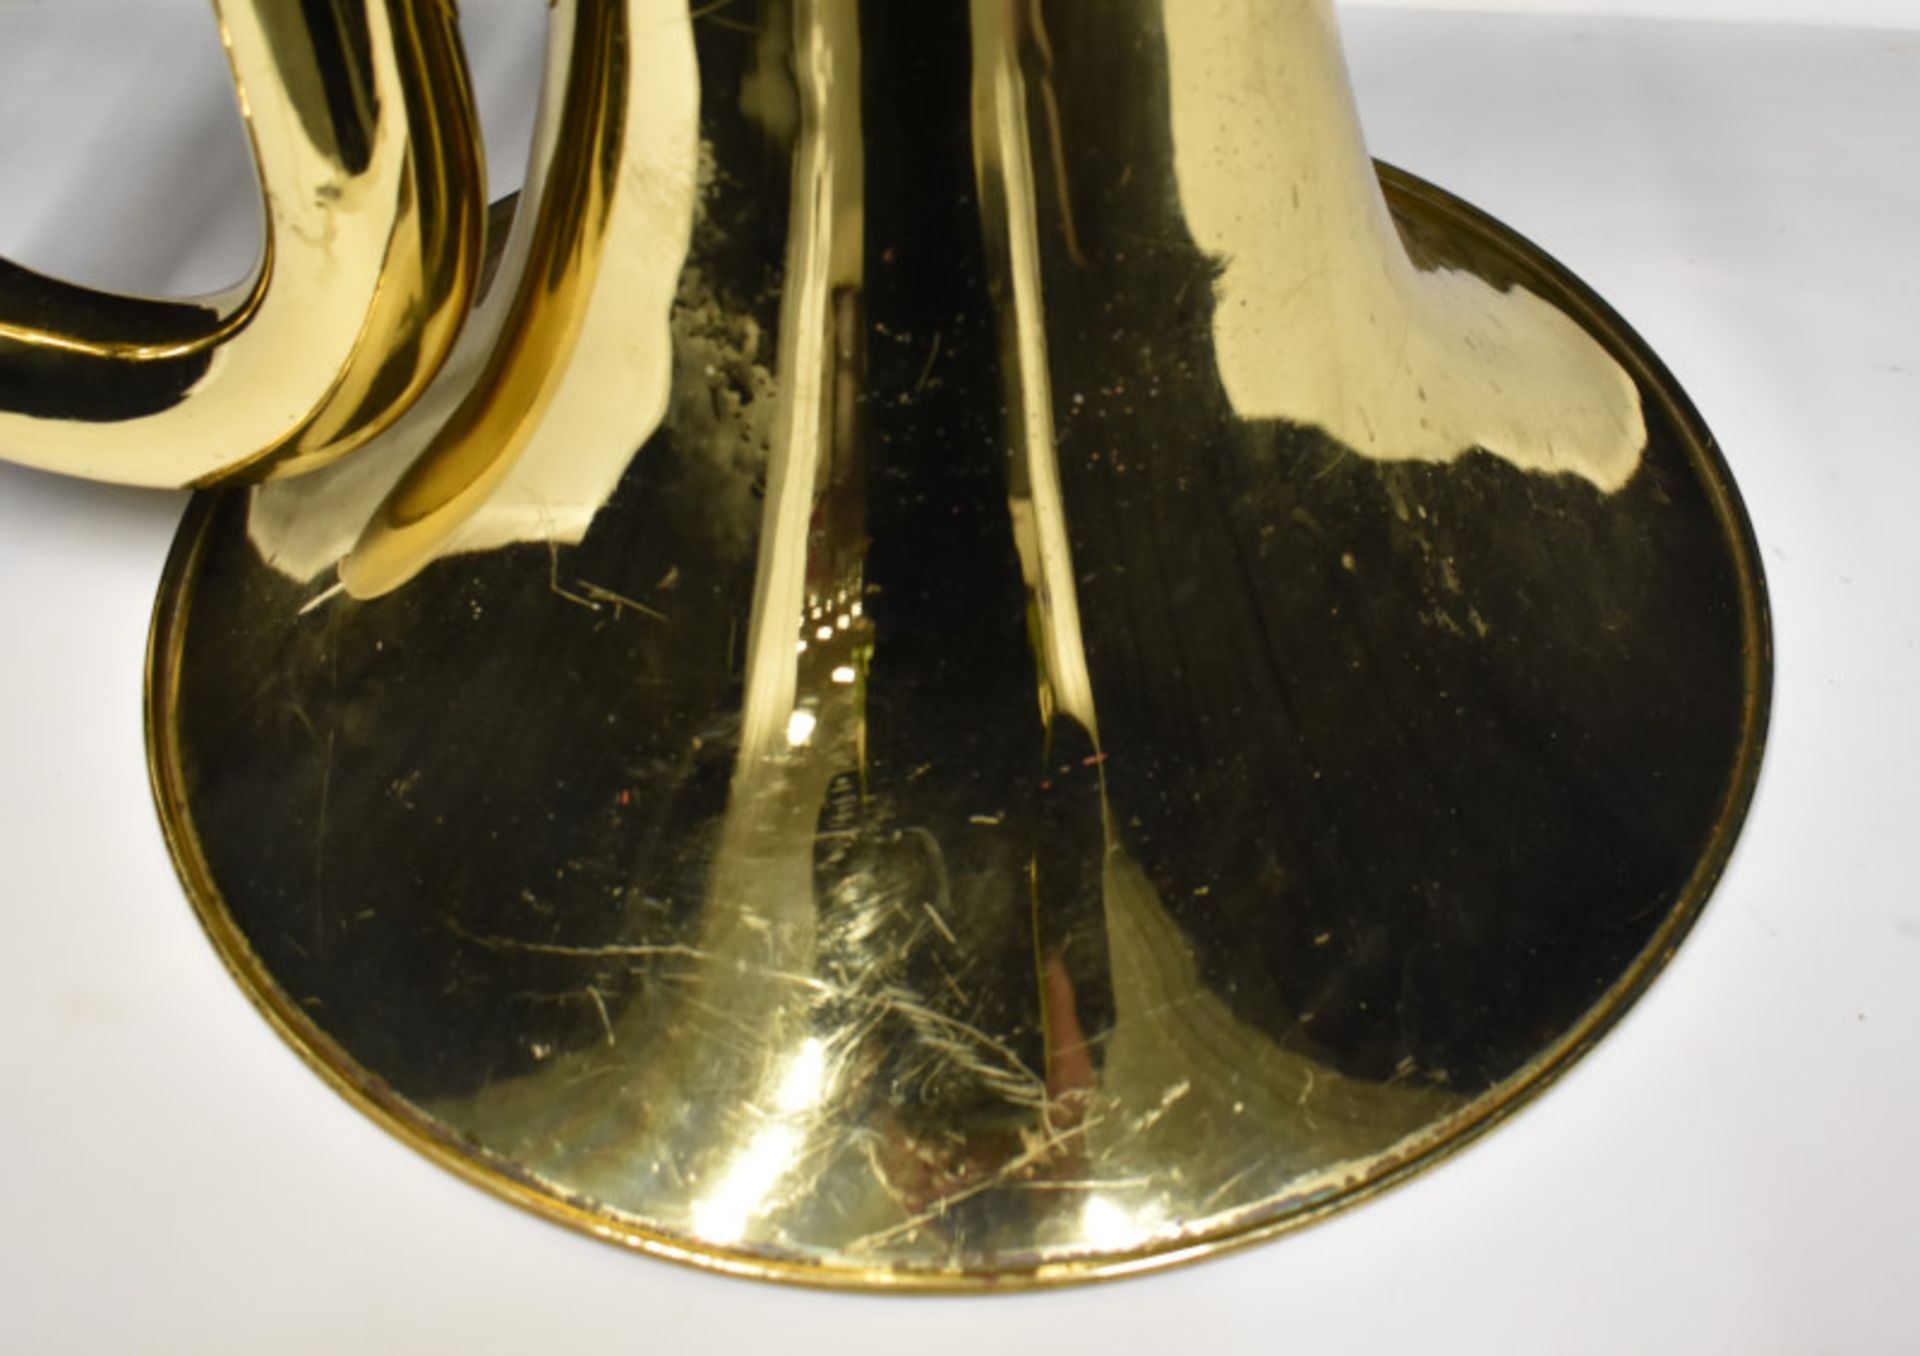 Besson Sovereign BE994 Tuba in Besson Case (case damaged no wheels) - Serial No. 883092 - - Image 11 of 21